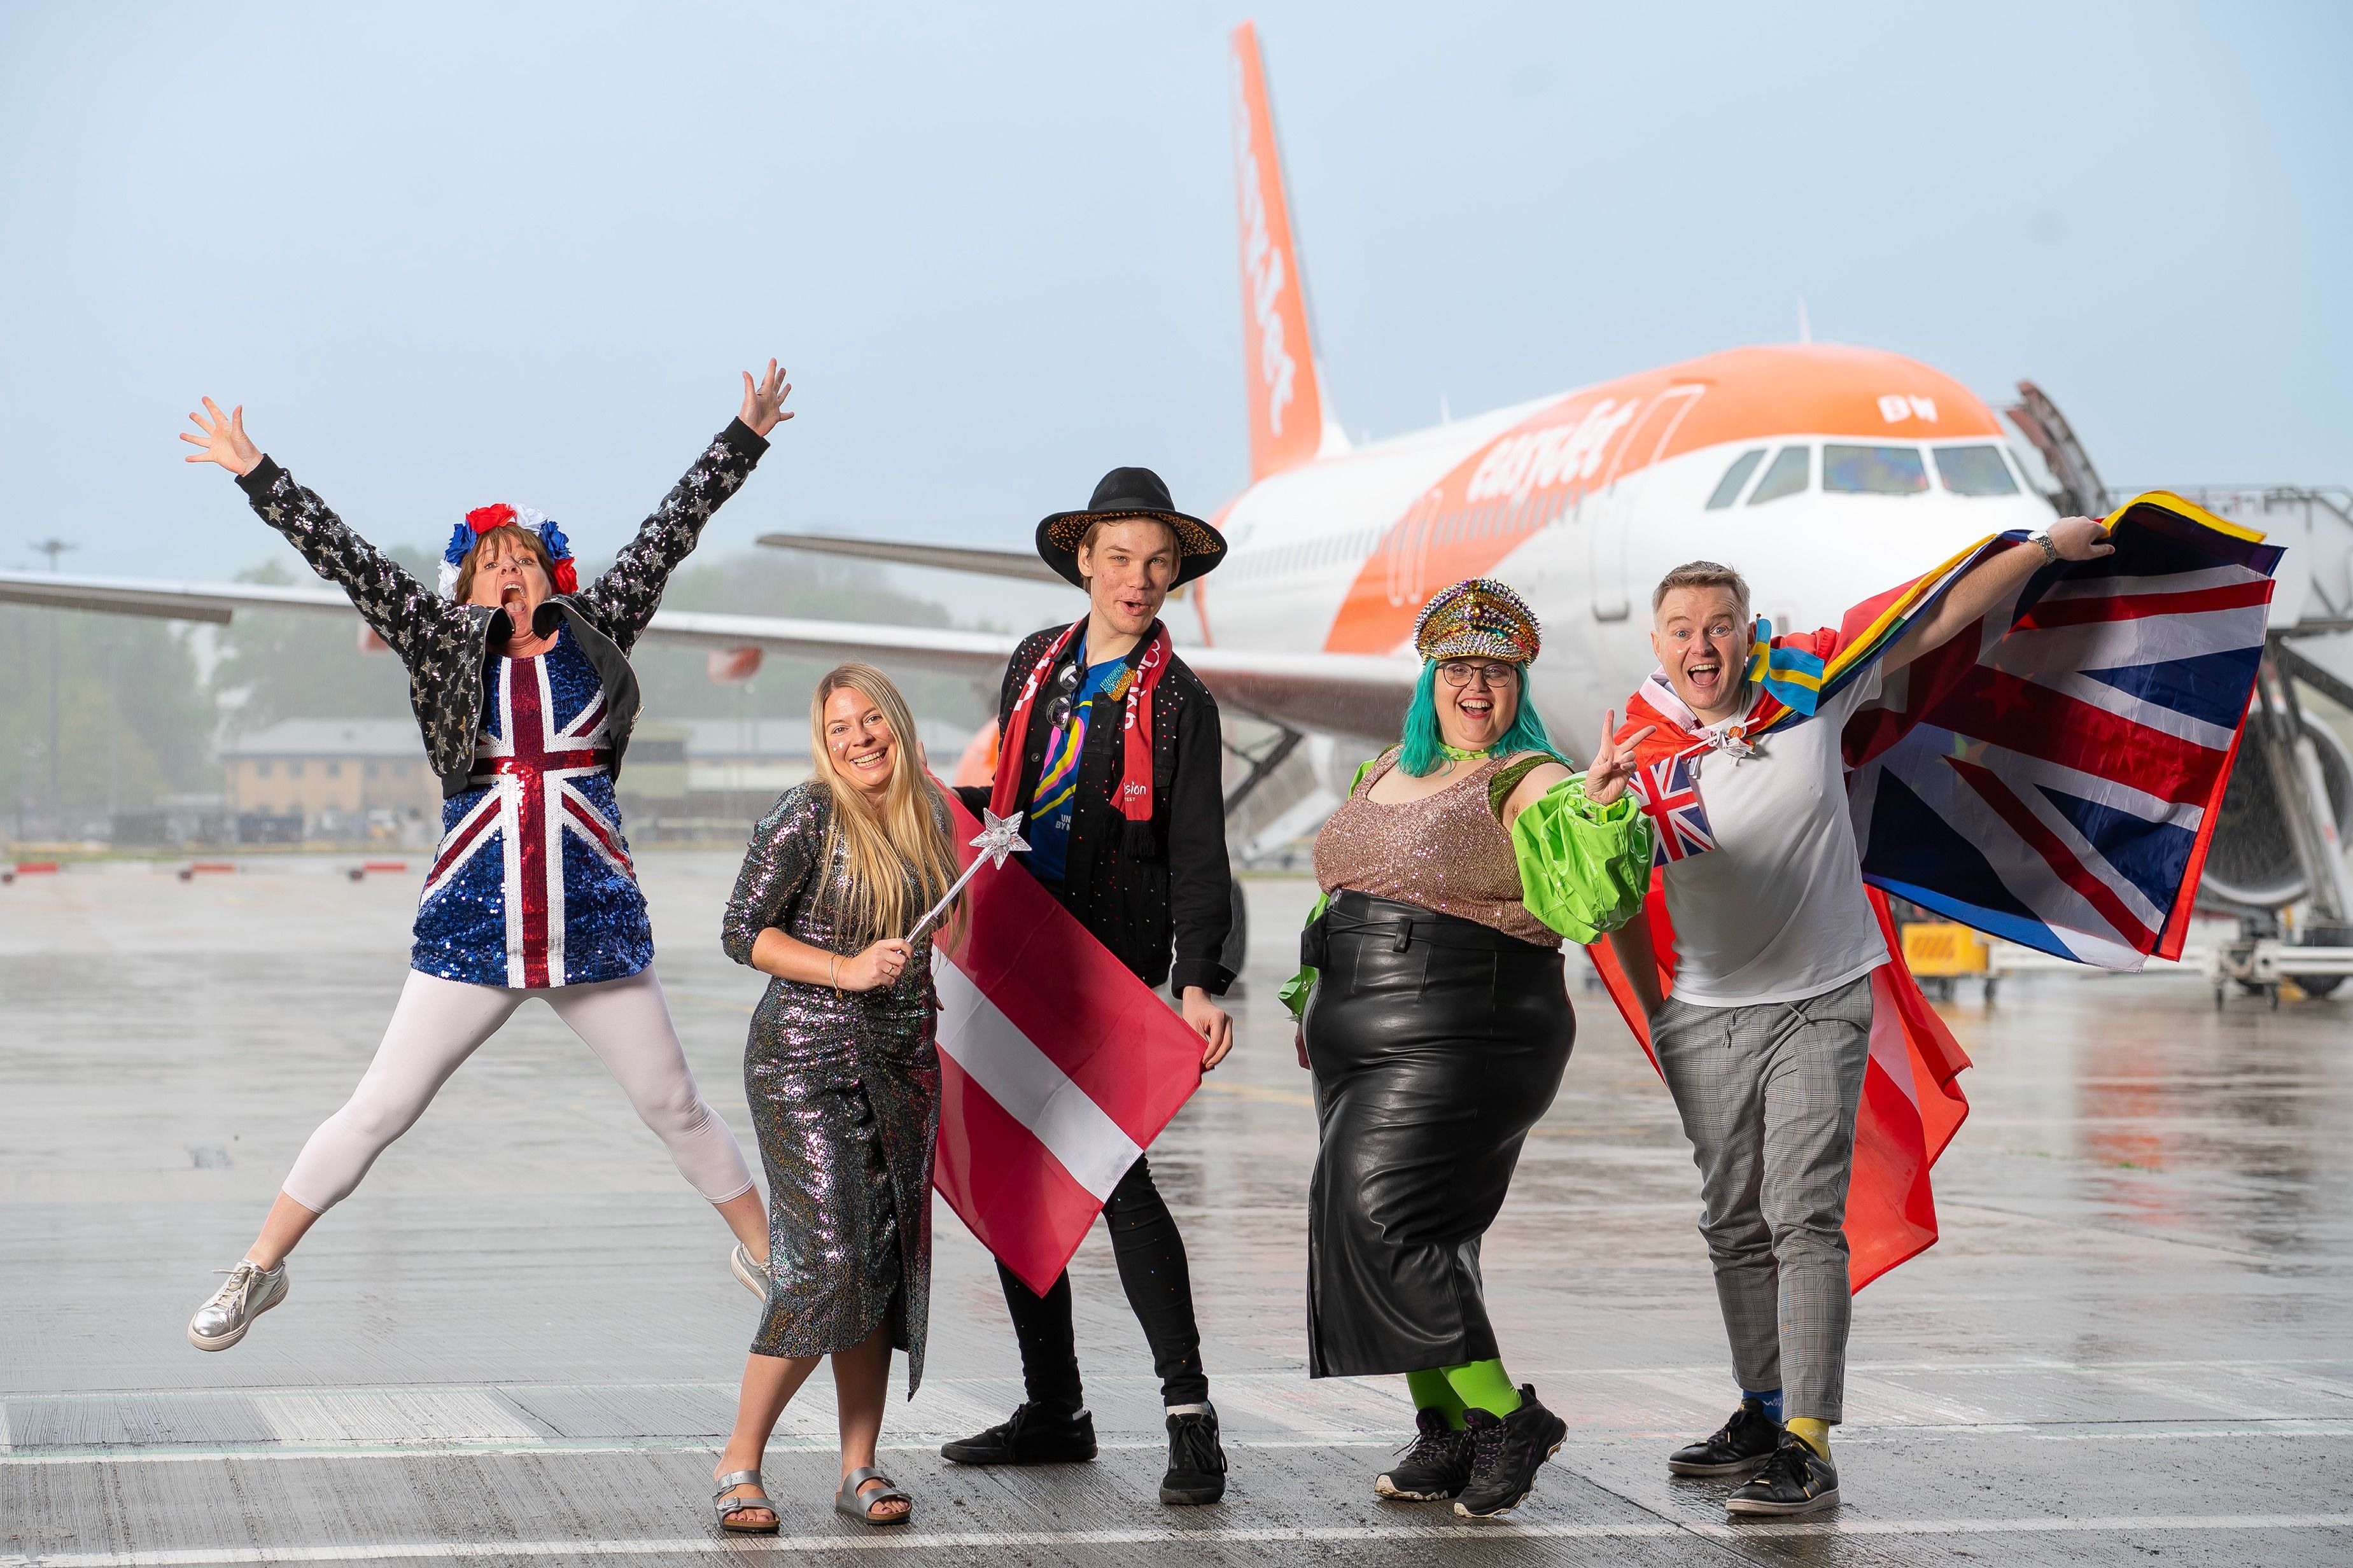 easyjet---eurovision-song-contest-flight-london-7th-may-2024_53704934385_o (1)